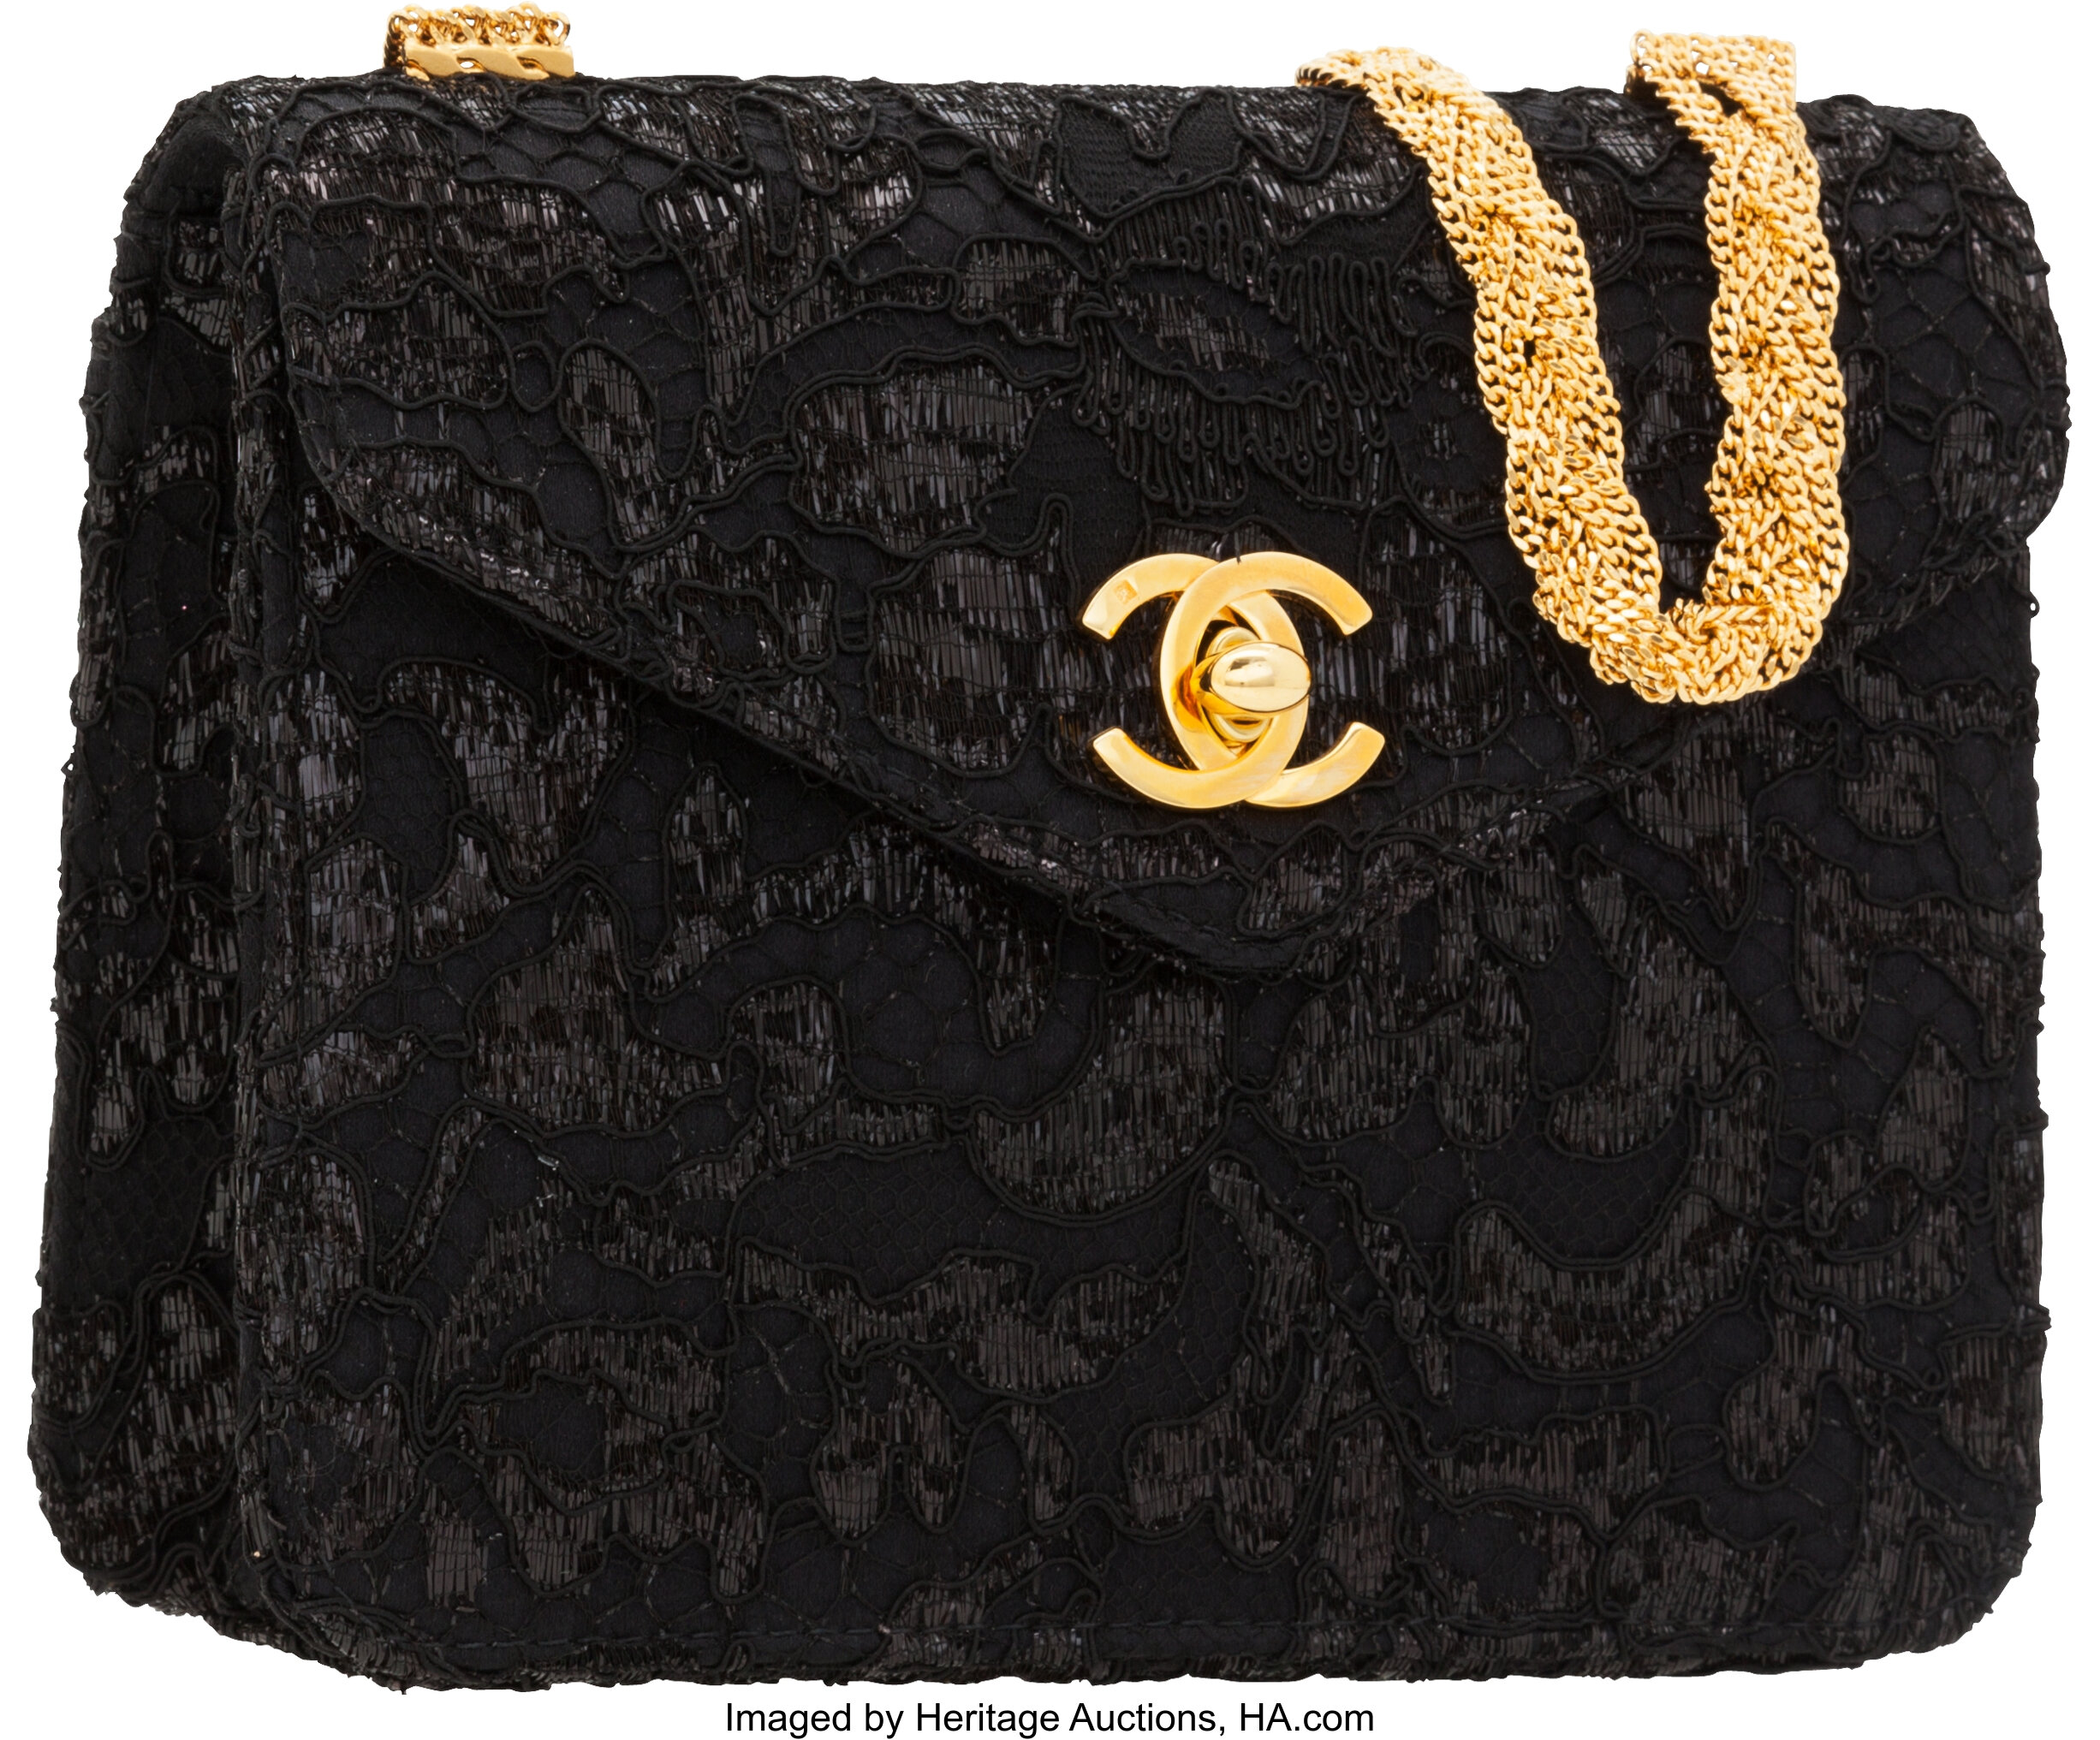 Chanel Black Satin Evening Bag with Lace Overlay & Braided Gold